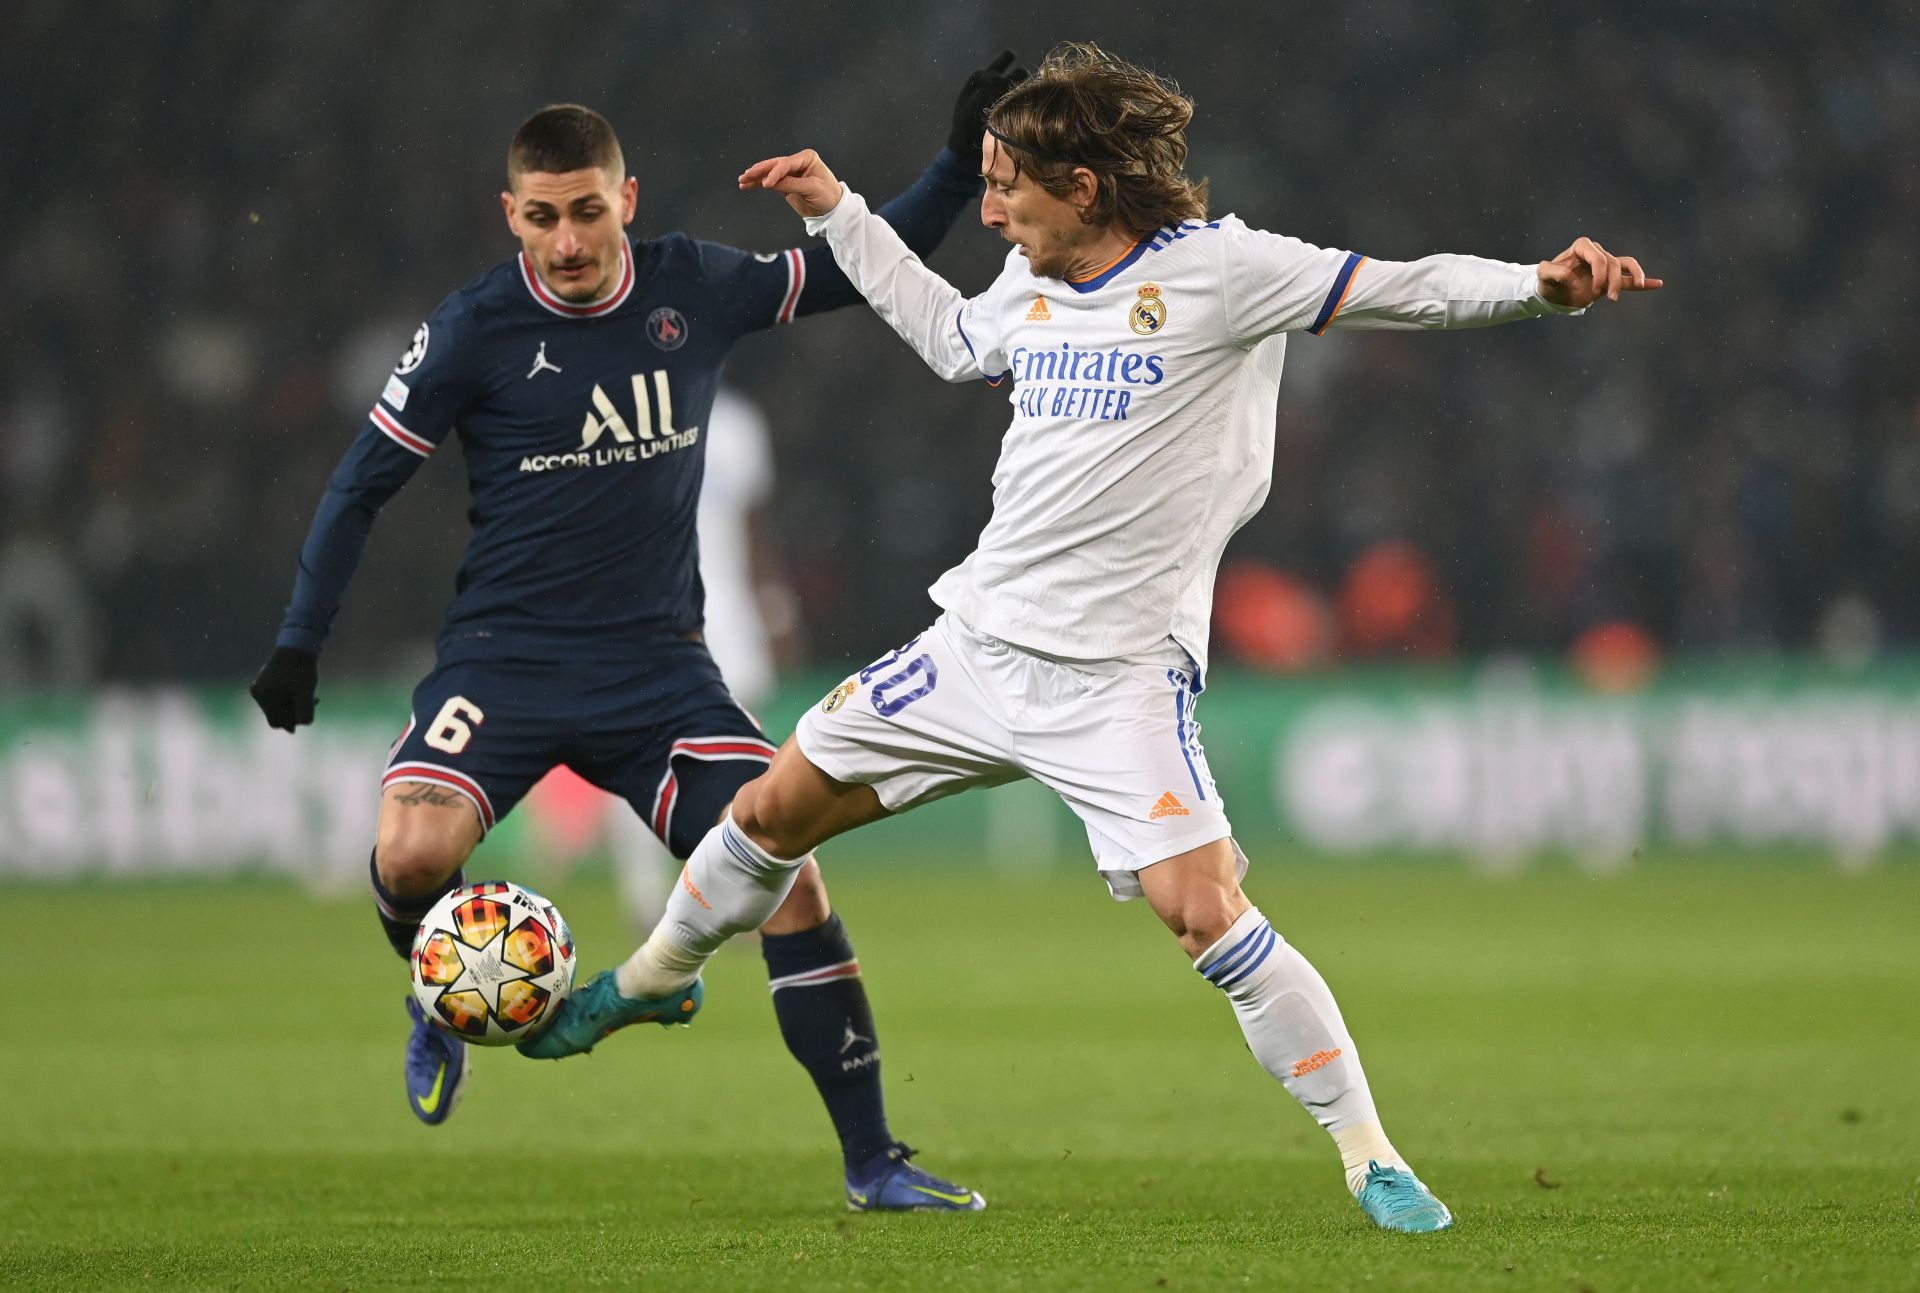 Marco Verratti is going to be key for PSG in the midfield against Real Madrid